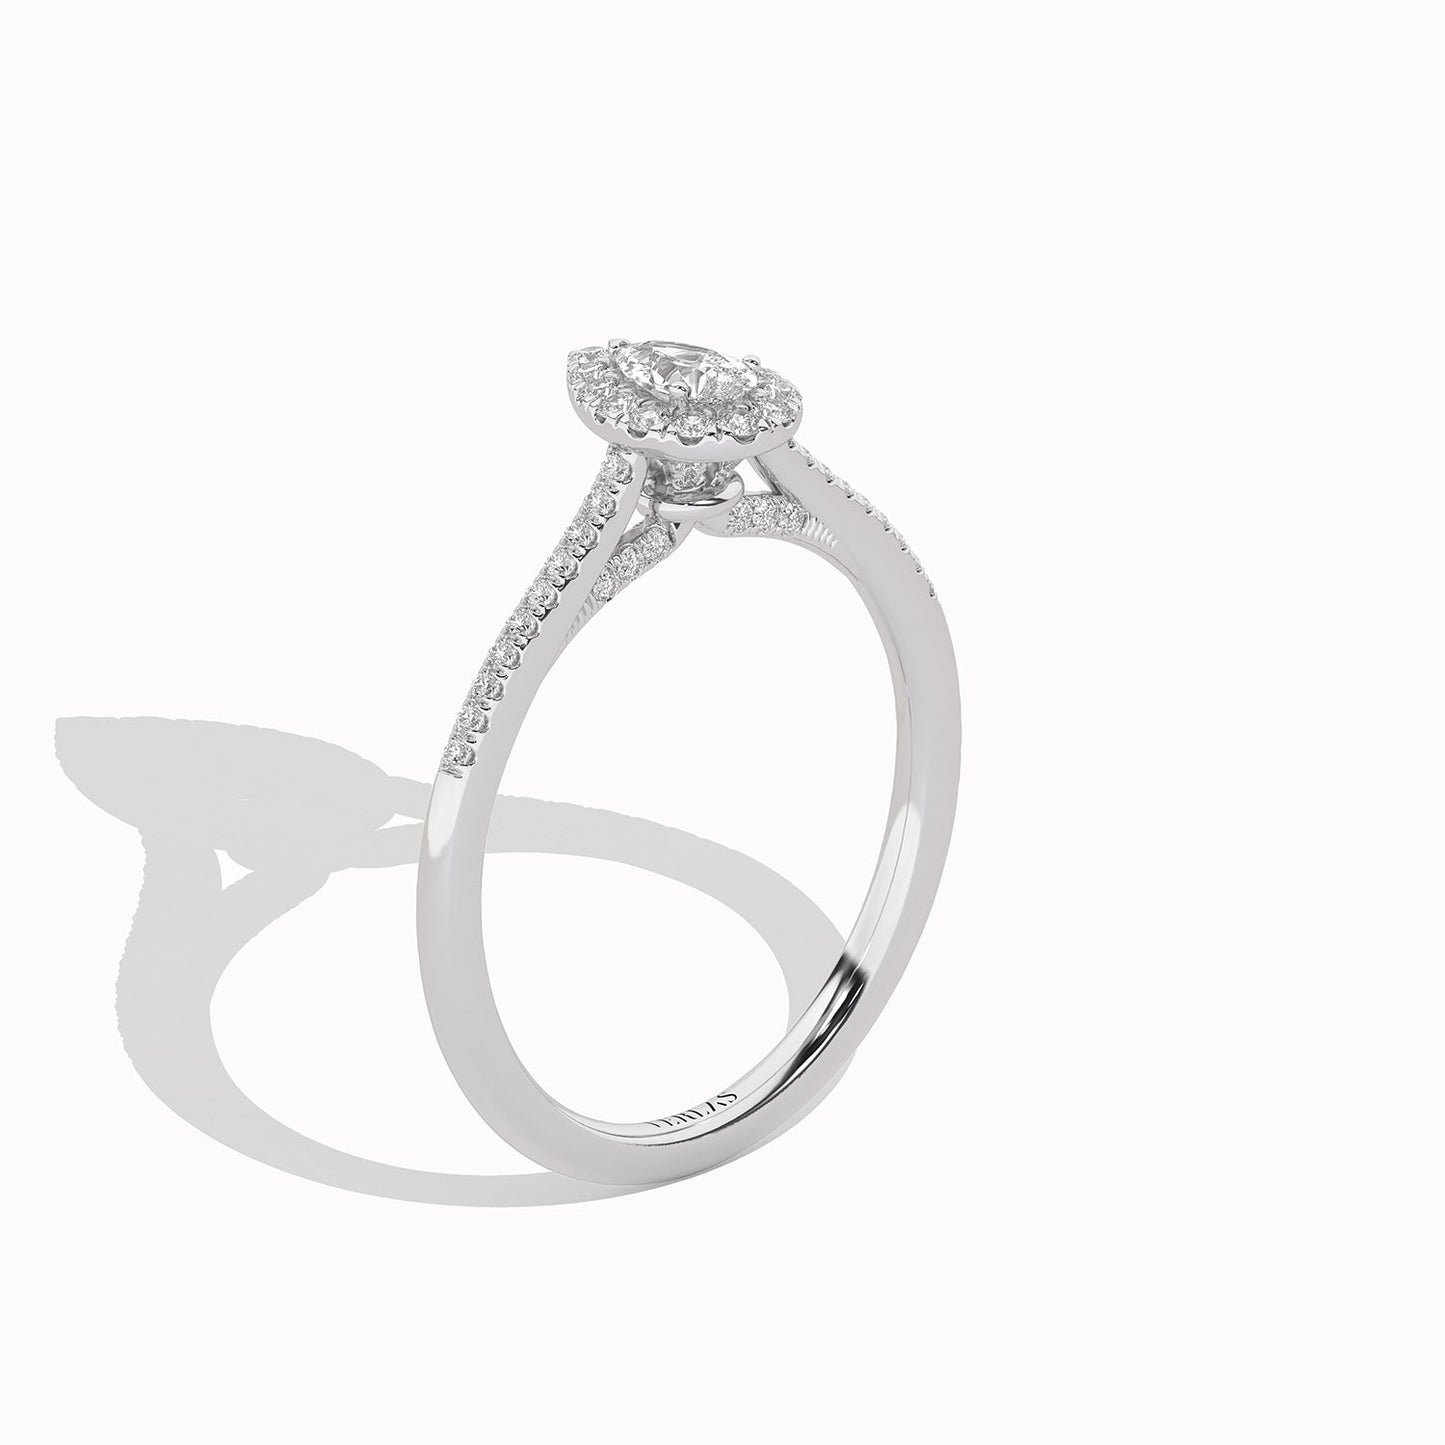 Signature Dewdrop Halo Ring_Product Angle_1/3Ct - 3